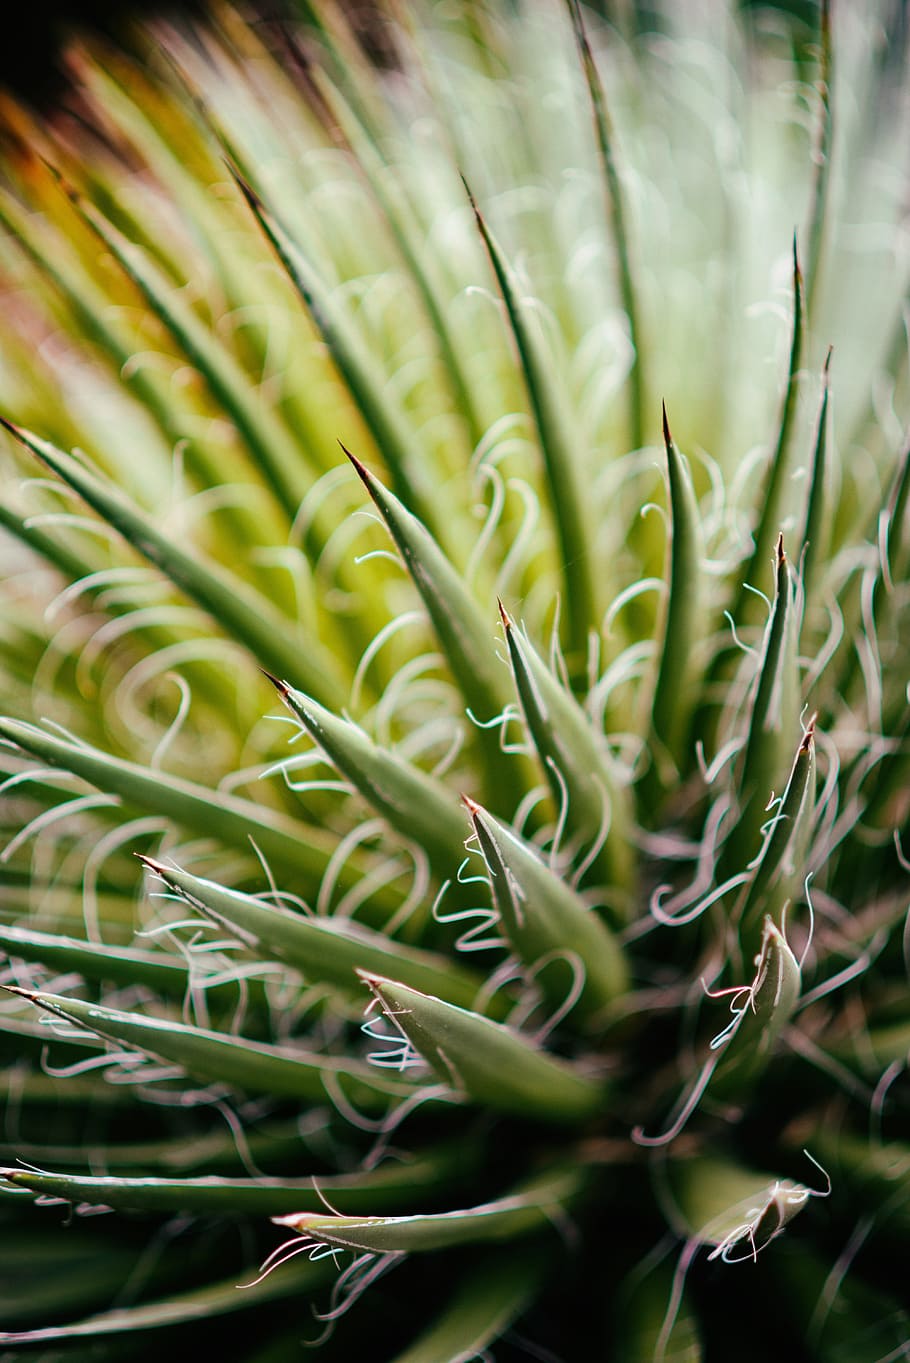 aloe, nature, plant, green, cure, thorn, thorny, green color, growth, close-up